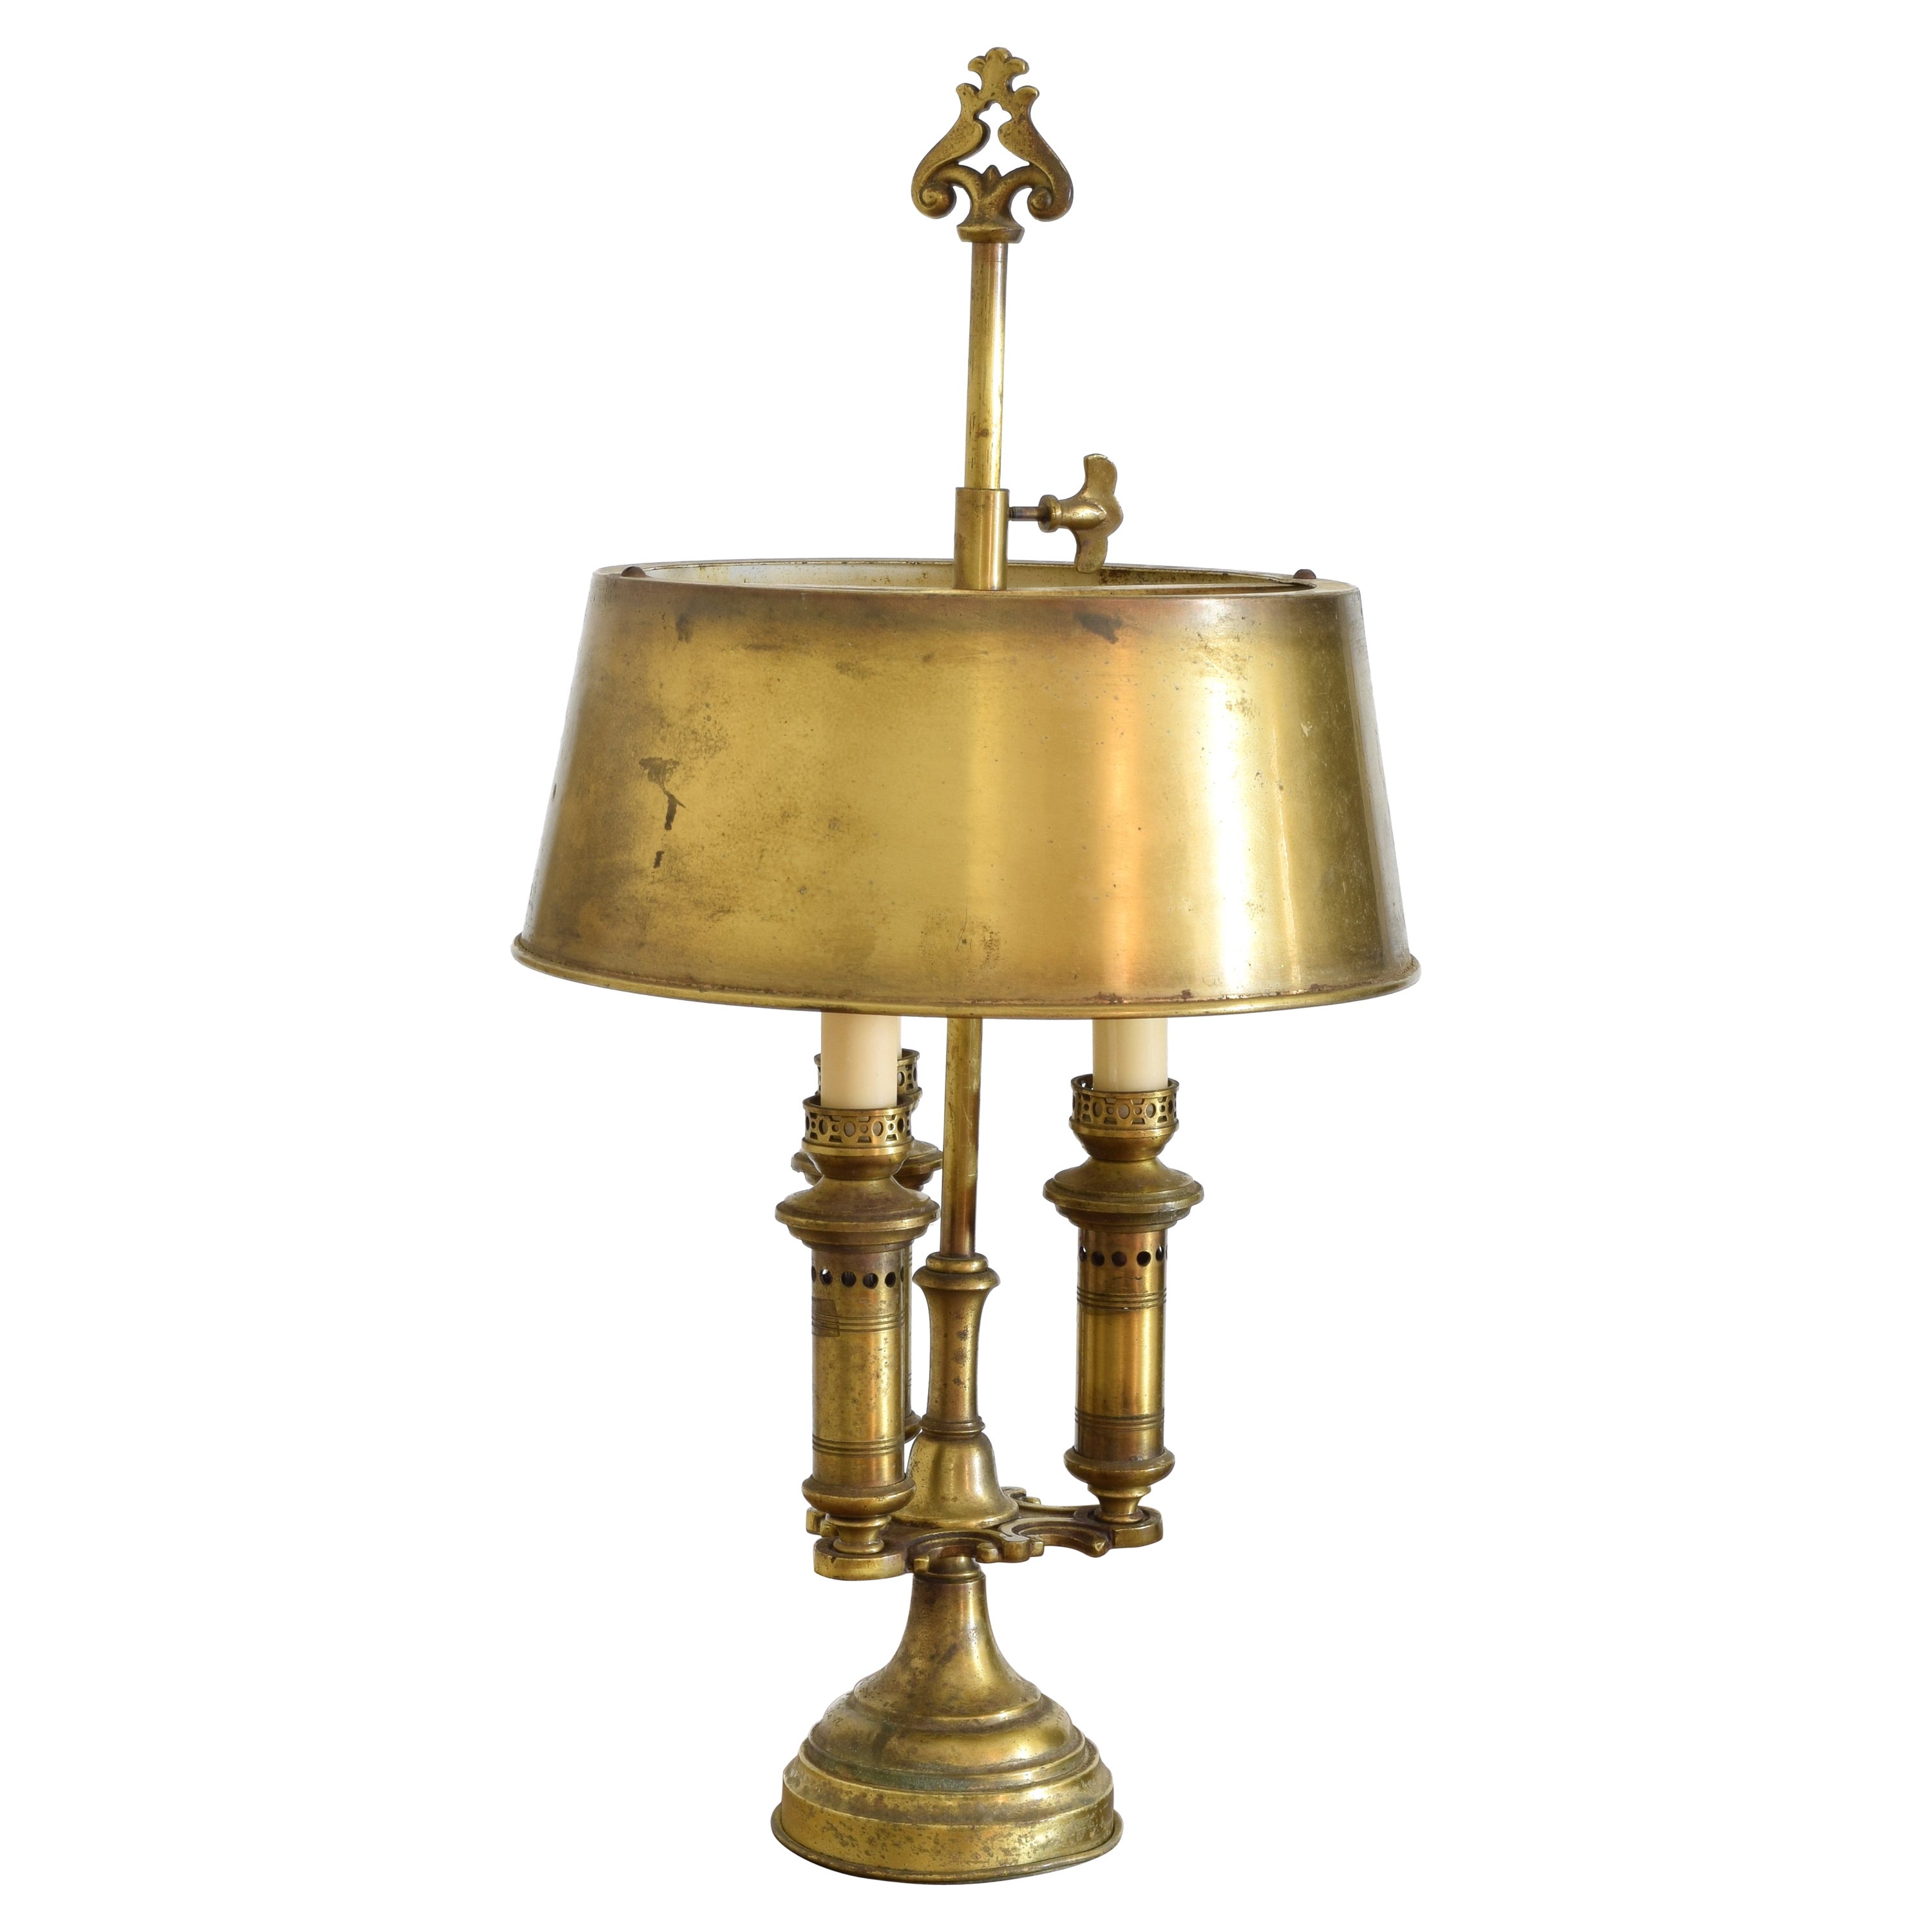 French Louis Philippe Cast Brass 3-Light Bouillotte Lamp, 2nd quarter 19th cen. For Sale